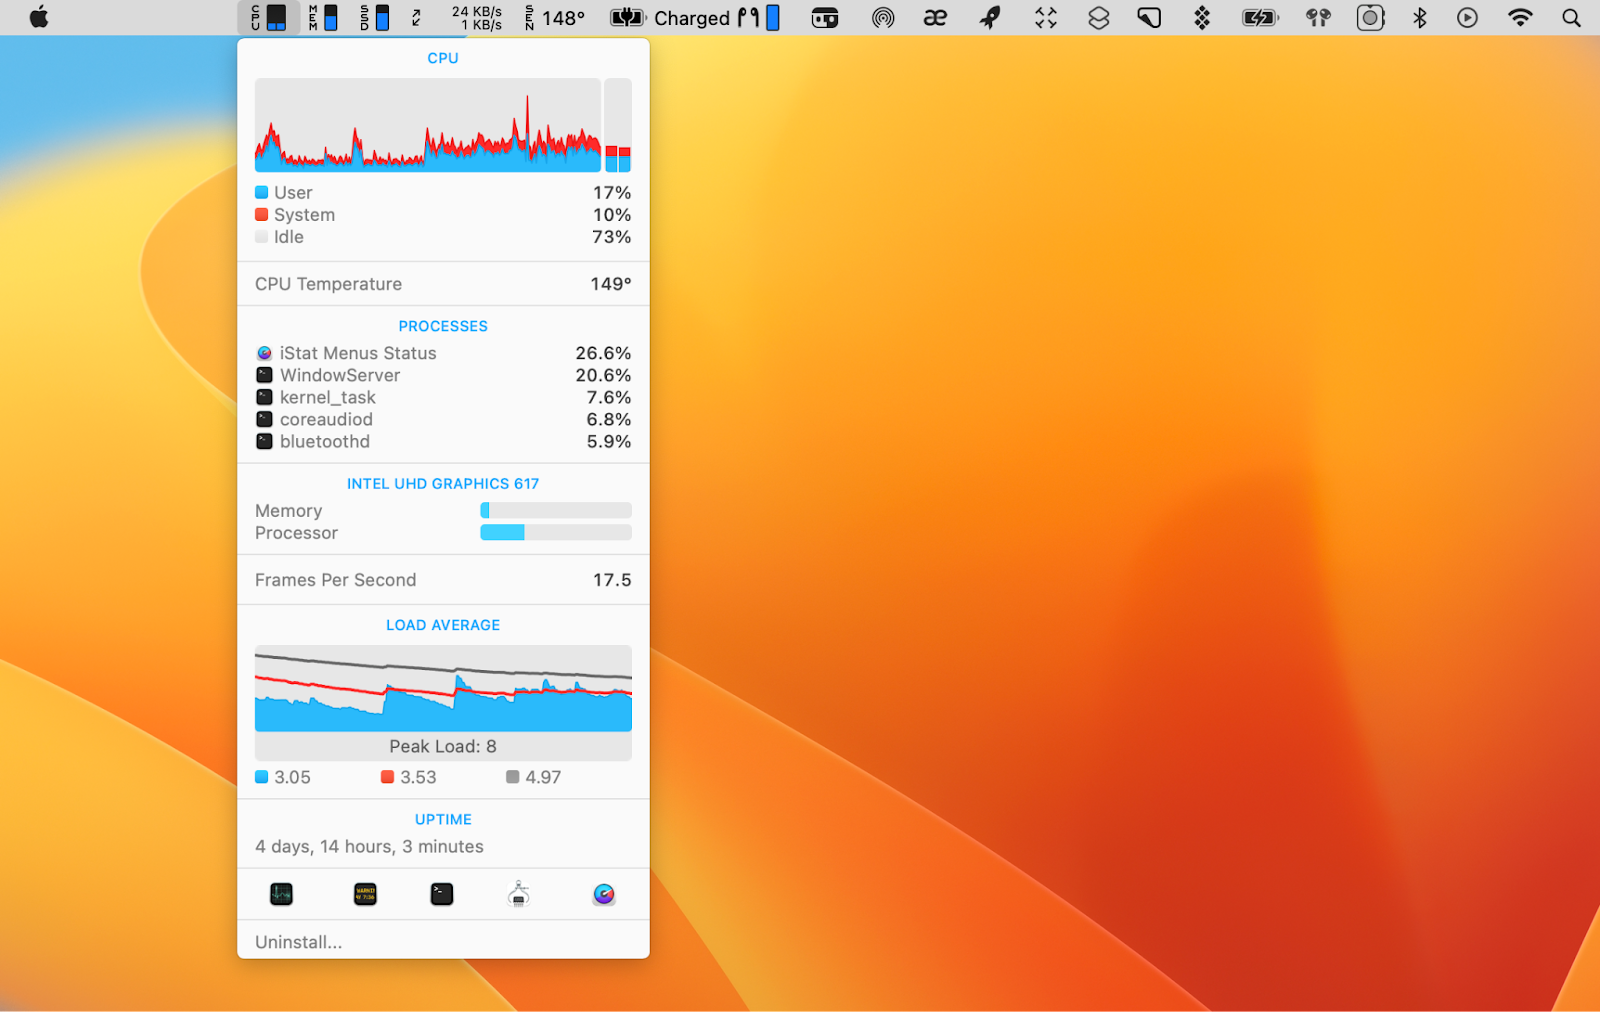 how can you remive istat menus from the bar